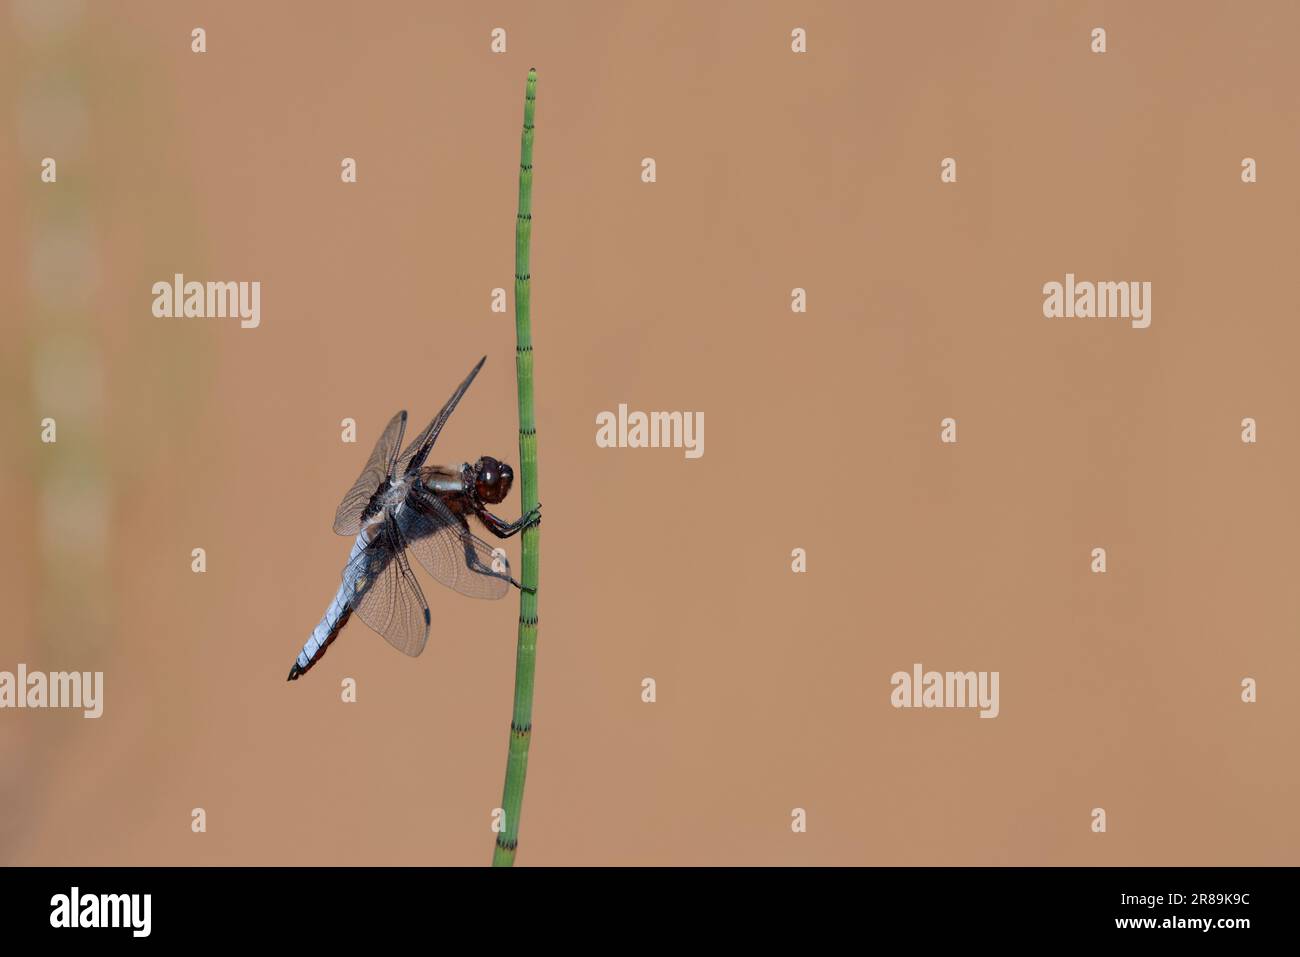 Blue male broad-bodied chaser Libellula depressa, broad flattened sky blue abdomen with small yellow dots on sides brown wing base dark dash on wings Stock Photo